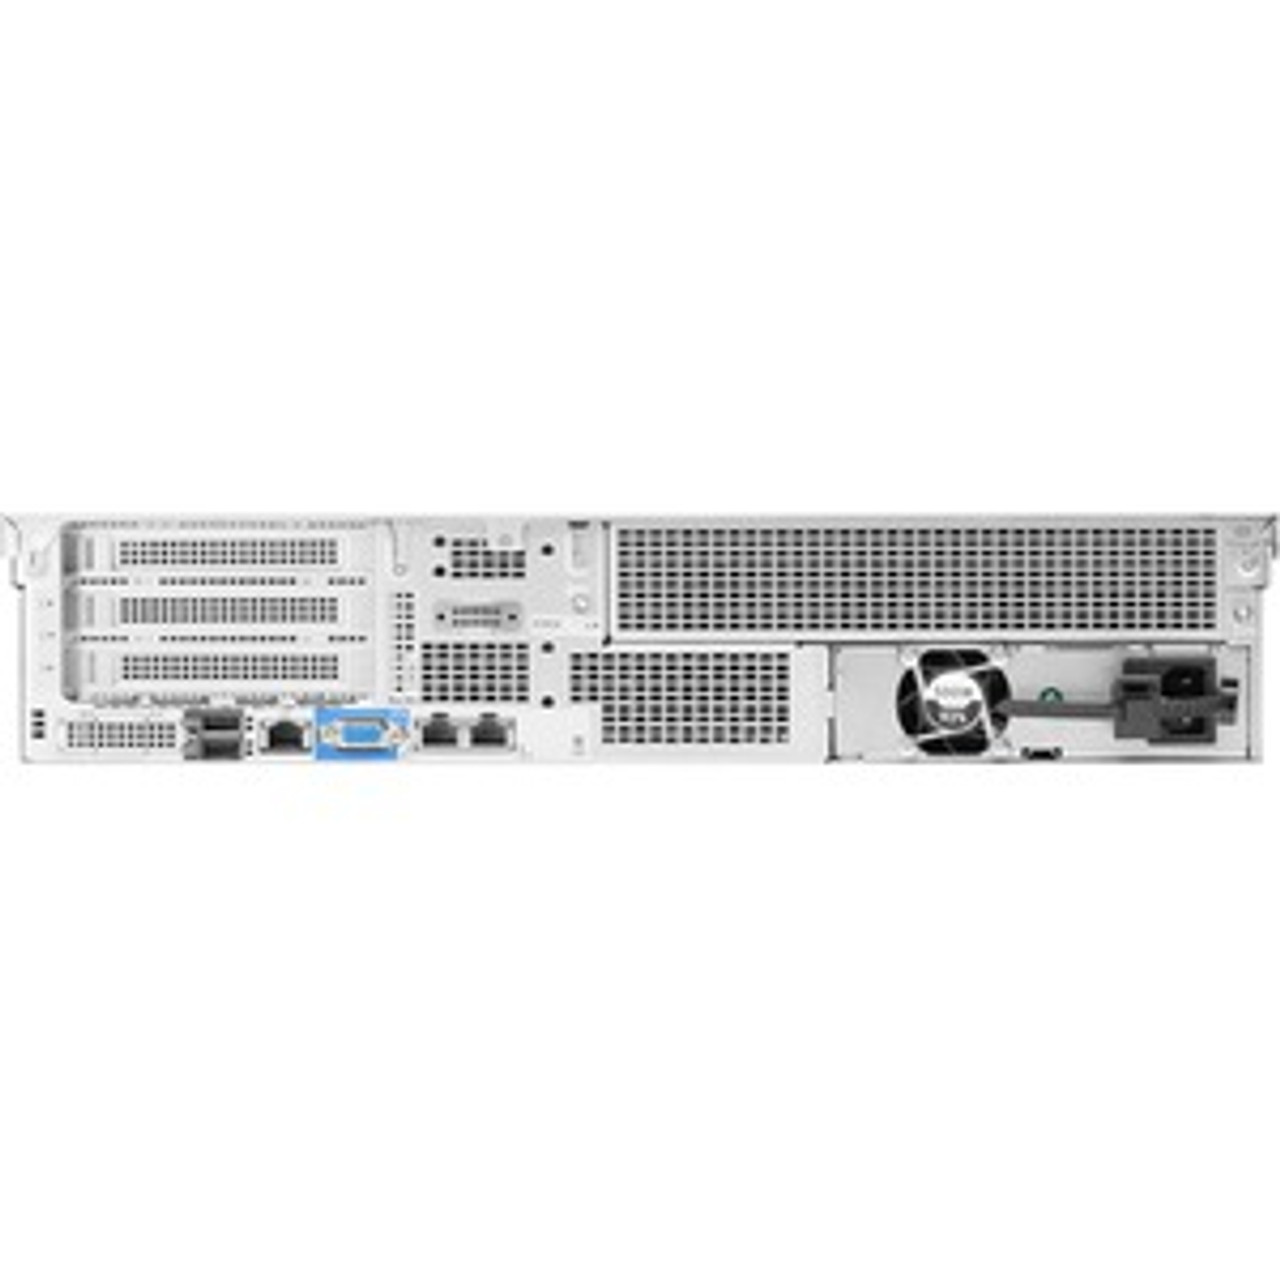 HPE ProLiant DL180 G10 2U Rack Server - 1 x Intel Xeon Gold 5218 2.30 GHz - 16 GB RAM - Serial ATA/600 Controller - Intel C622 Chip - 2 Processor Support - 1 TB RAM Support - Up to 16 MB Graphic Card  - P35520-B21